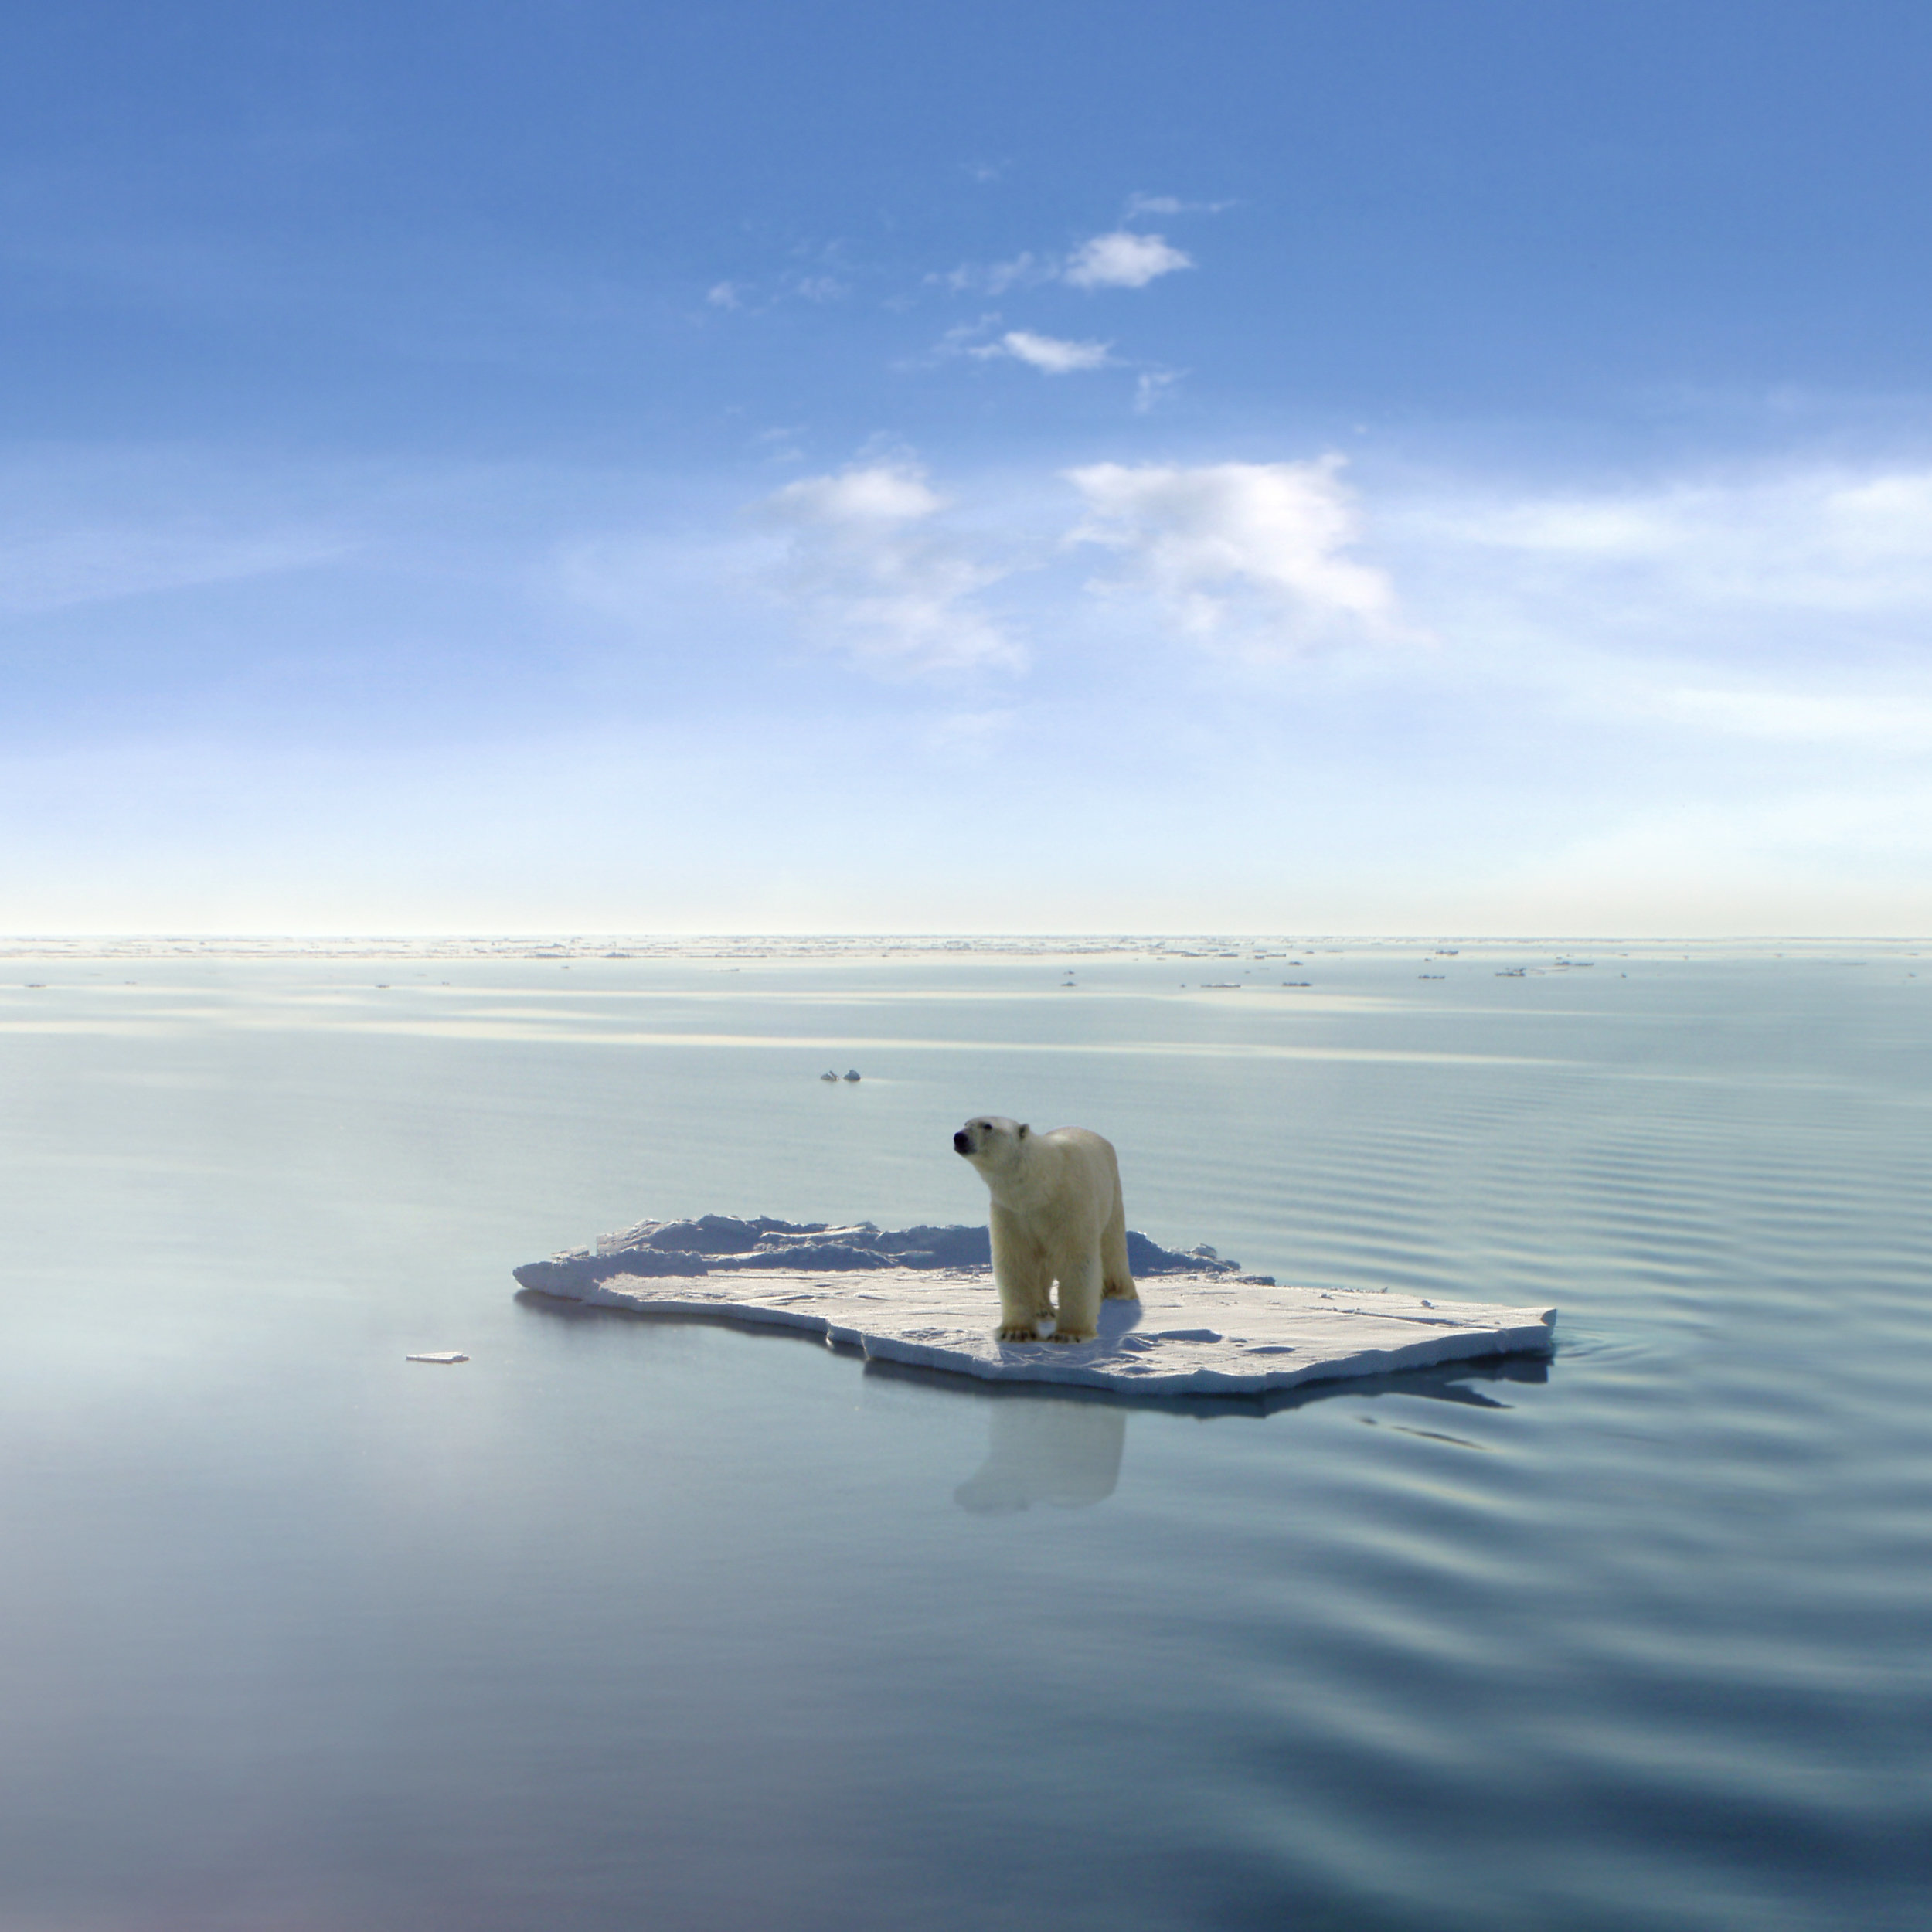 <strong>Polar bears depend on sea ice for hunting</strong>